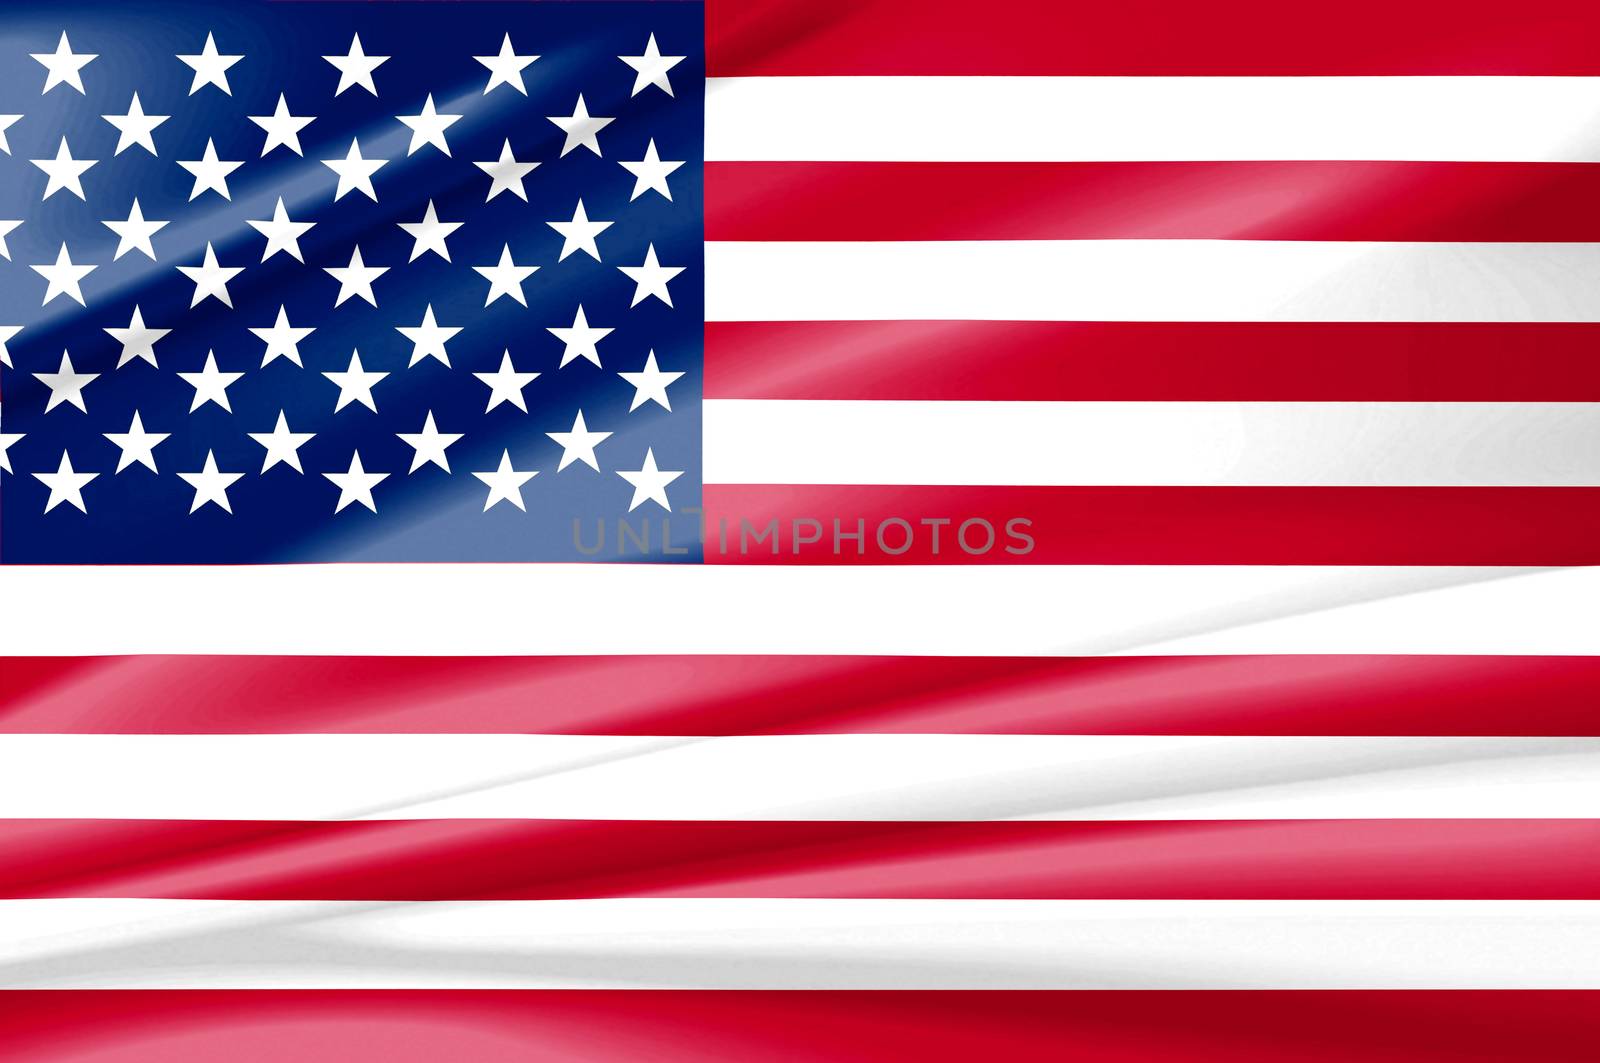 United States of america red white and blue country flag. Beautifully waving star and striped flag USA as a patriotic background.
